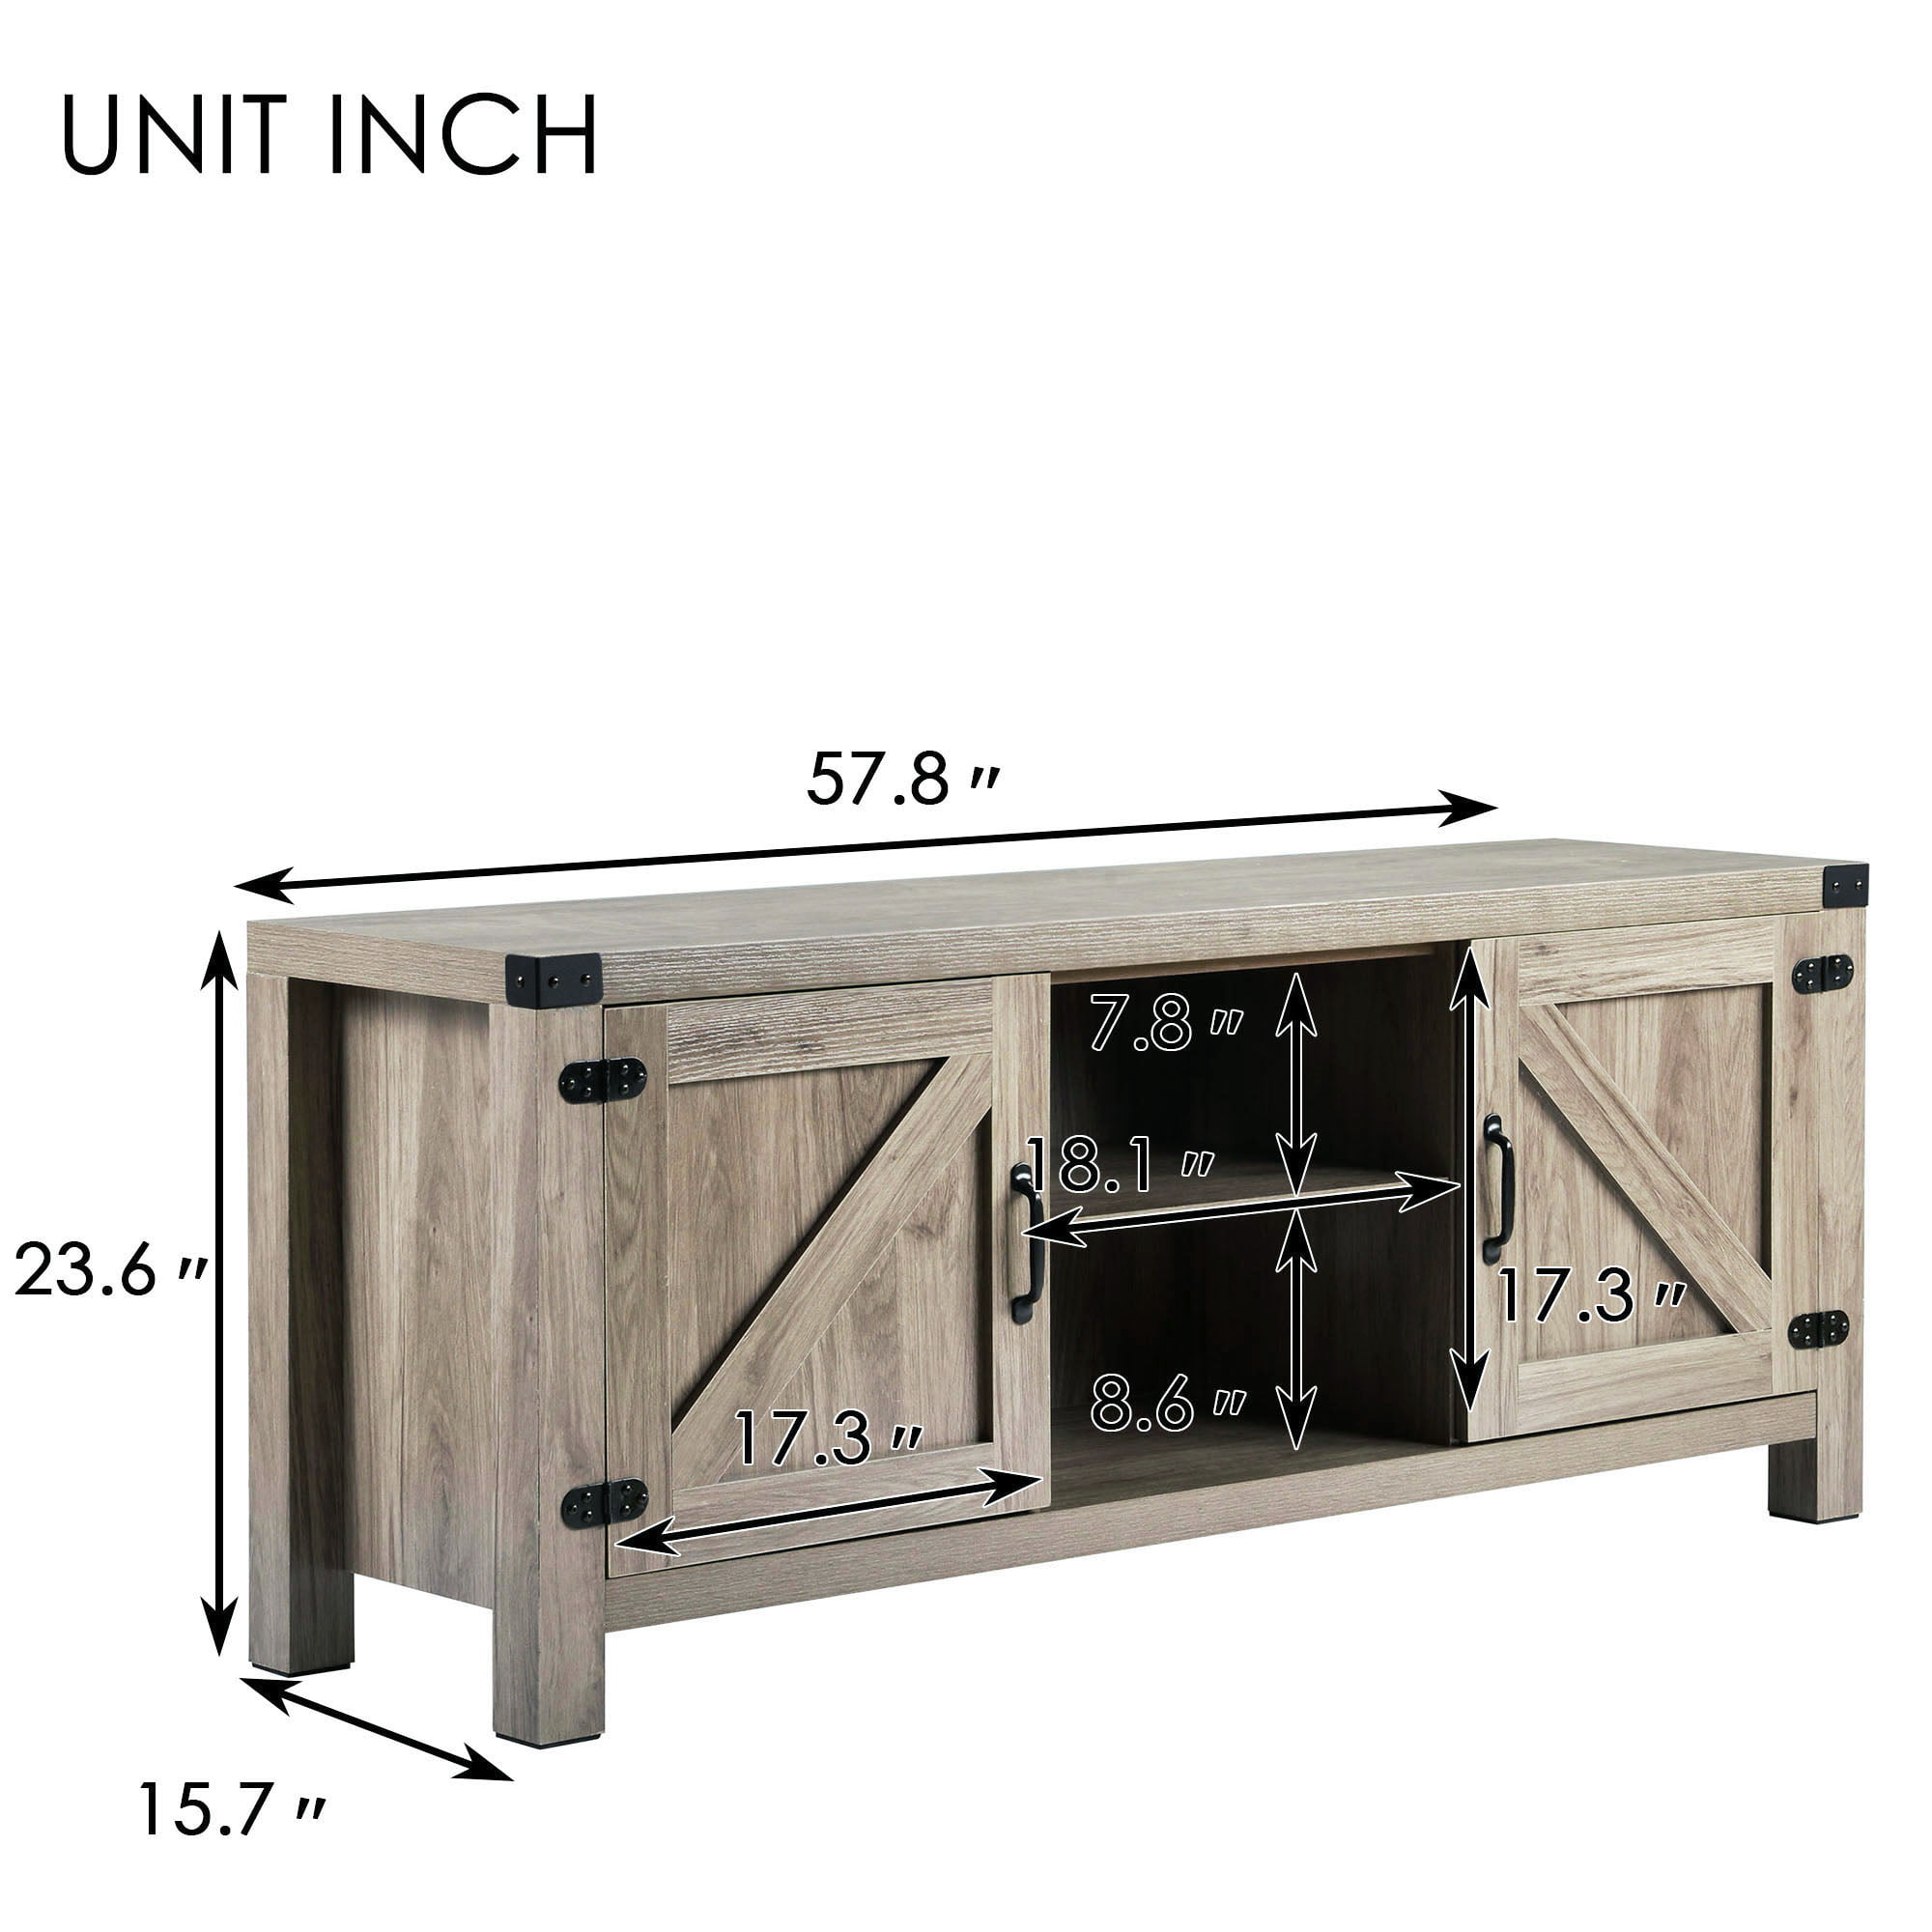 Details about   51"/43" Modern TV Cabinet Stand Unit Media Console Table w/shelf Home Furniture 